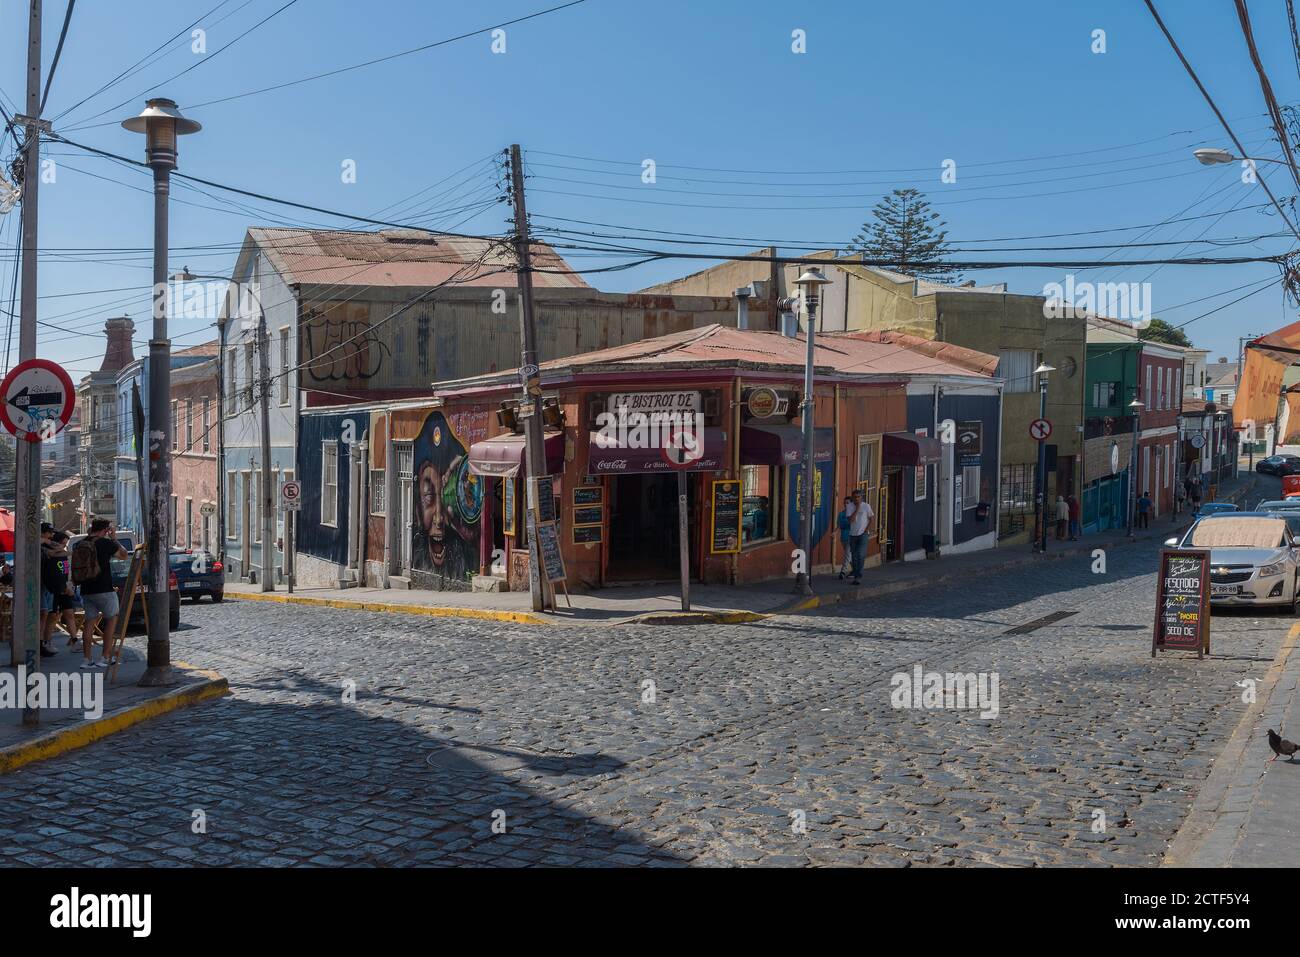 A view of a street in the old town of Valparaiso, Chile Stock Photo